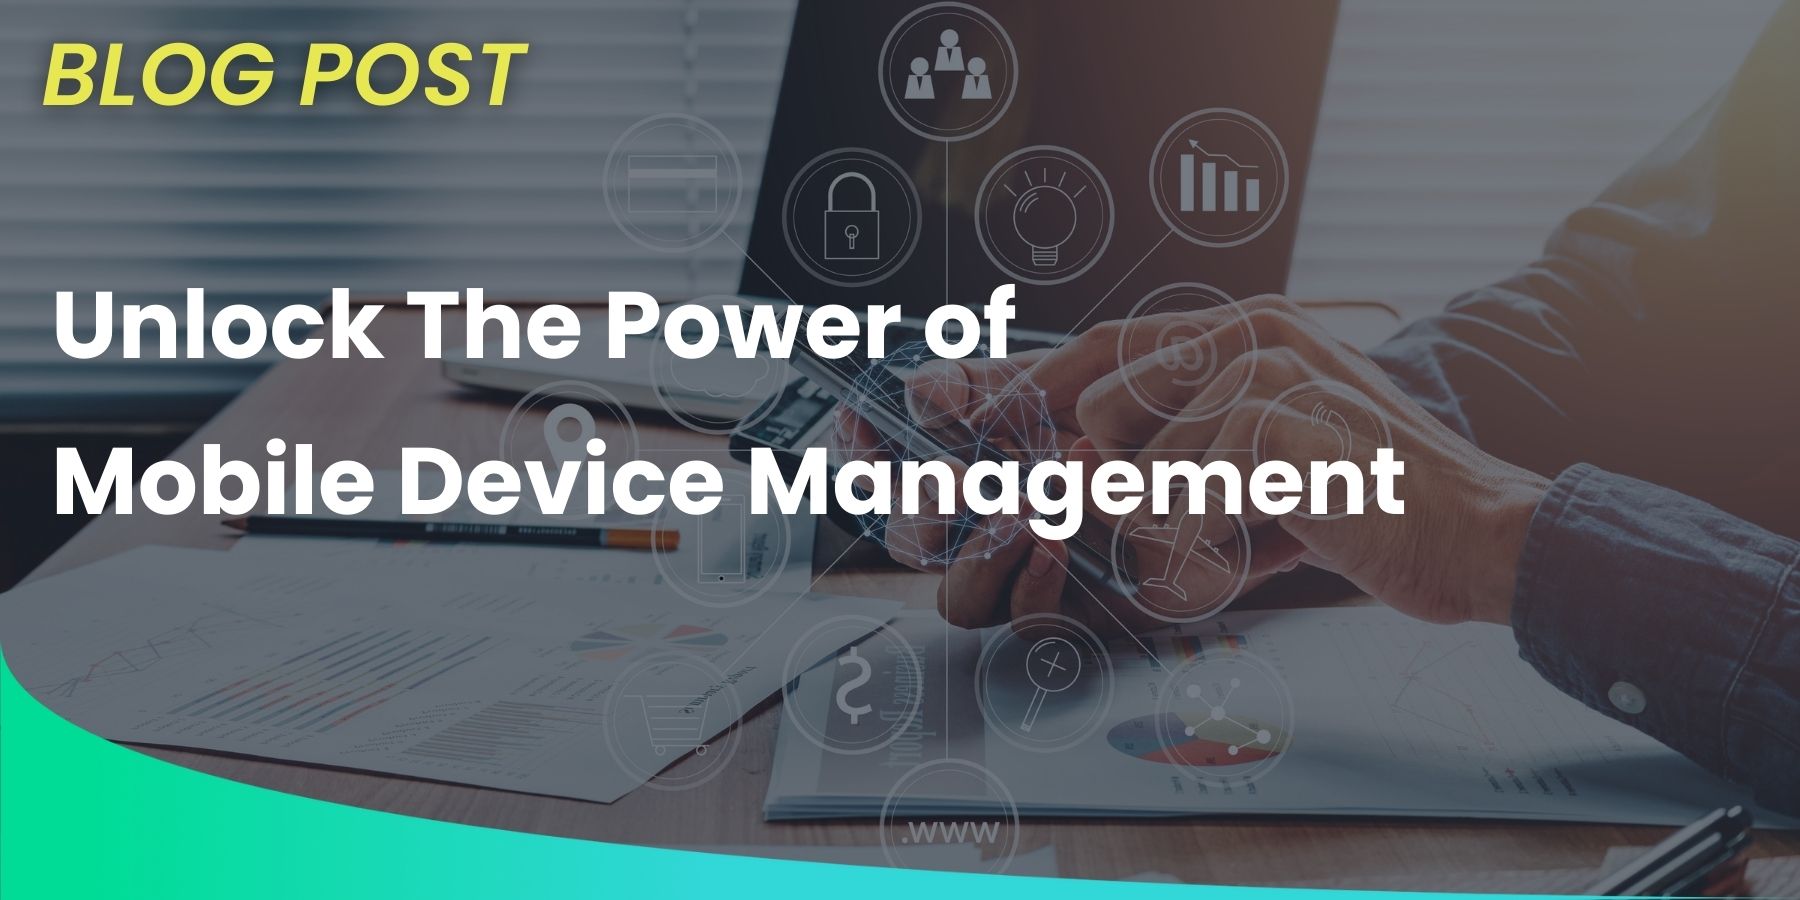 Featured image for “Unlock the Power of Mobile Device Management: Boost Security, Productivity, and Compliance”